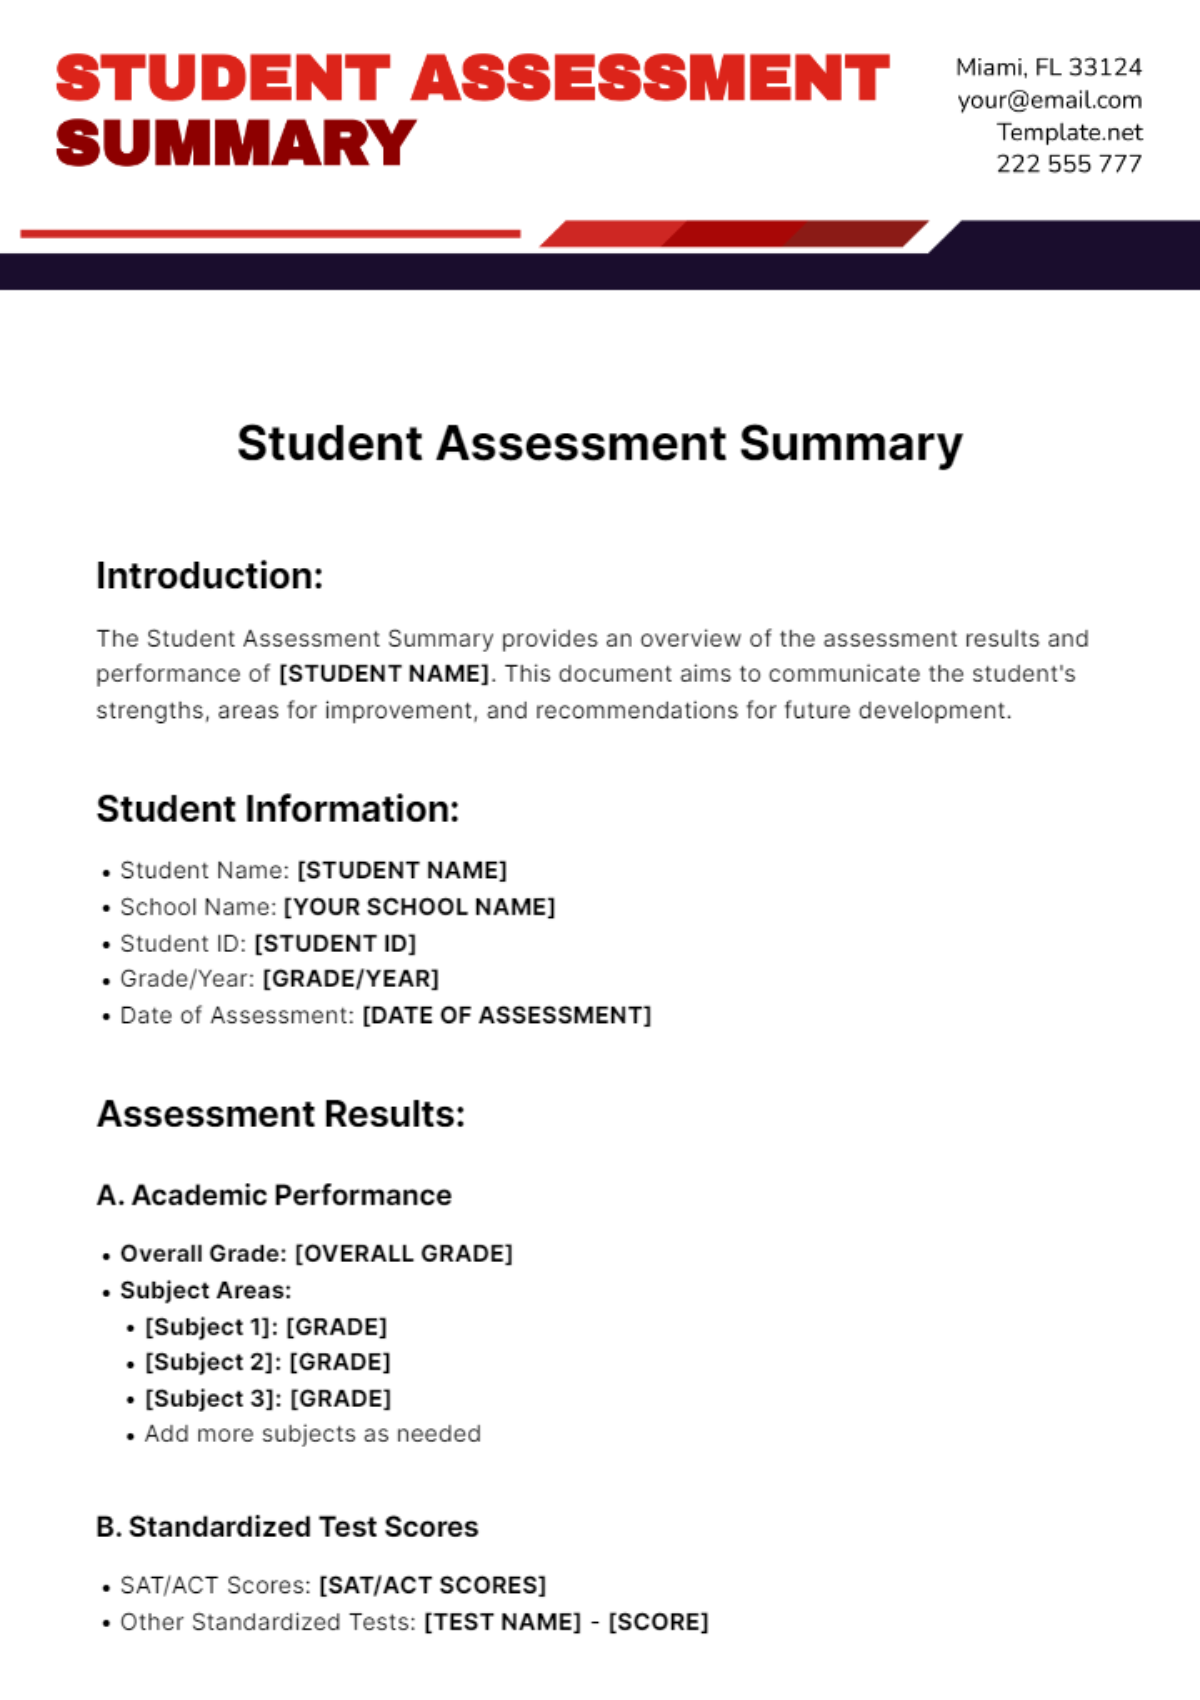 Student Assessment Summary Template